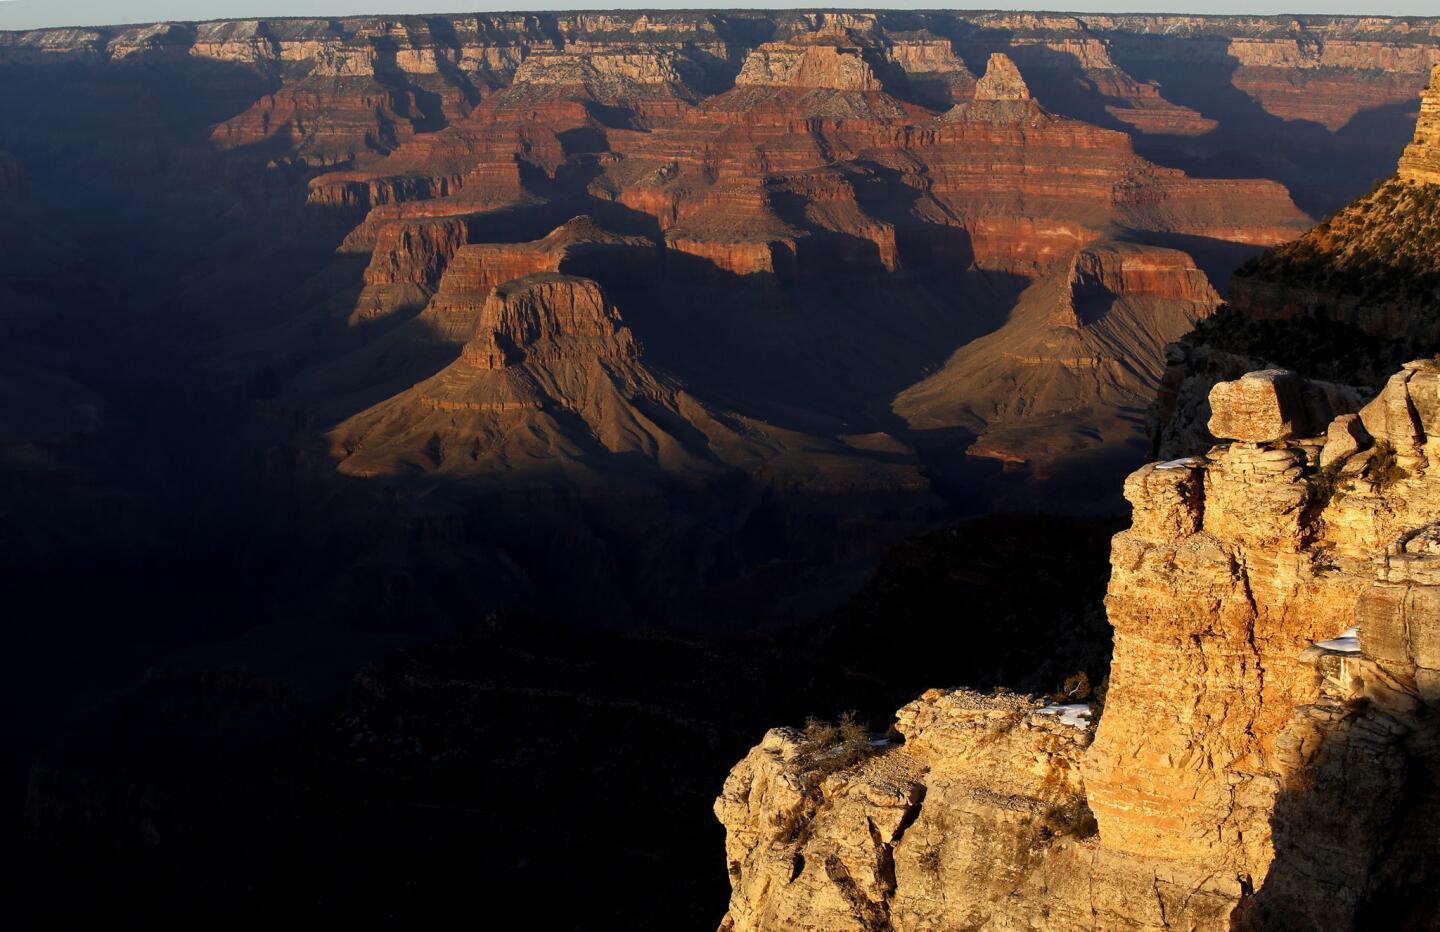 Formed by the meandering Colorado River, the Grand Canyon is 277 miles long, 18 miles wide and a mile deep. More than 5 million visitors flock to the national park annually. MORE: The Grand Canyon, just as the Kolb brothers pictured it